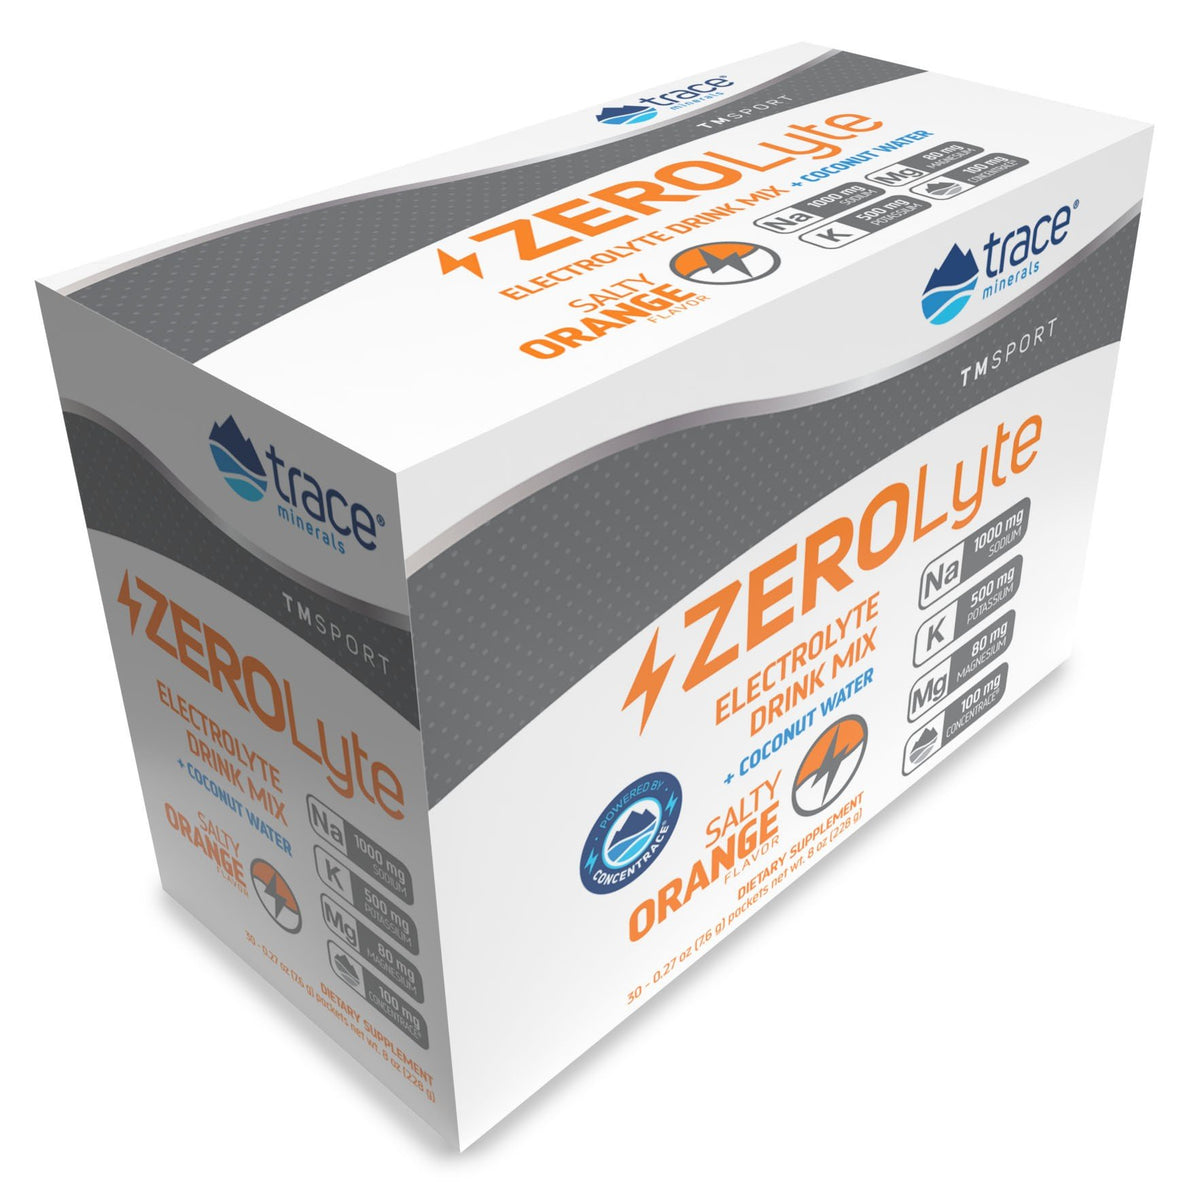 Trace Minerals TMSPORT-ZeroLyte-Electrolyte Drink Mix + Coconut Water-Salty Orange Flavor 30 Packets Box